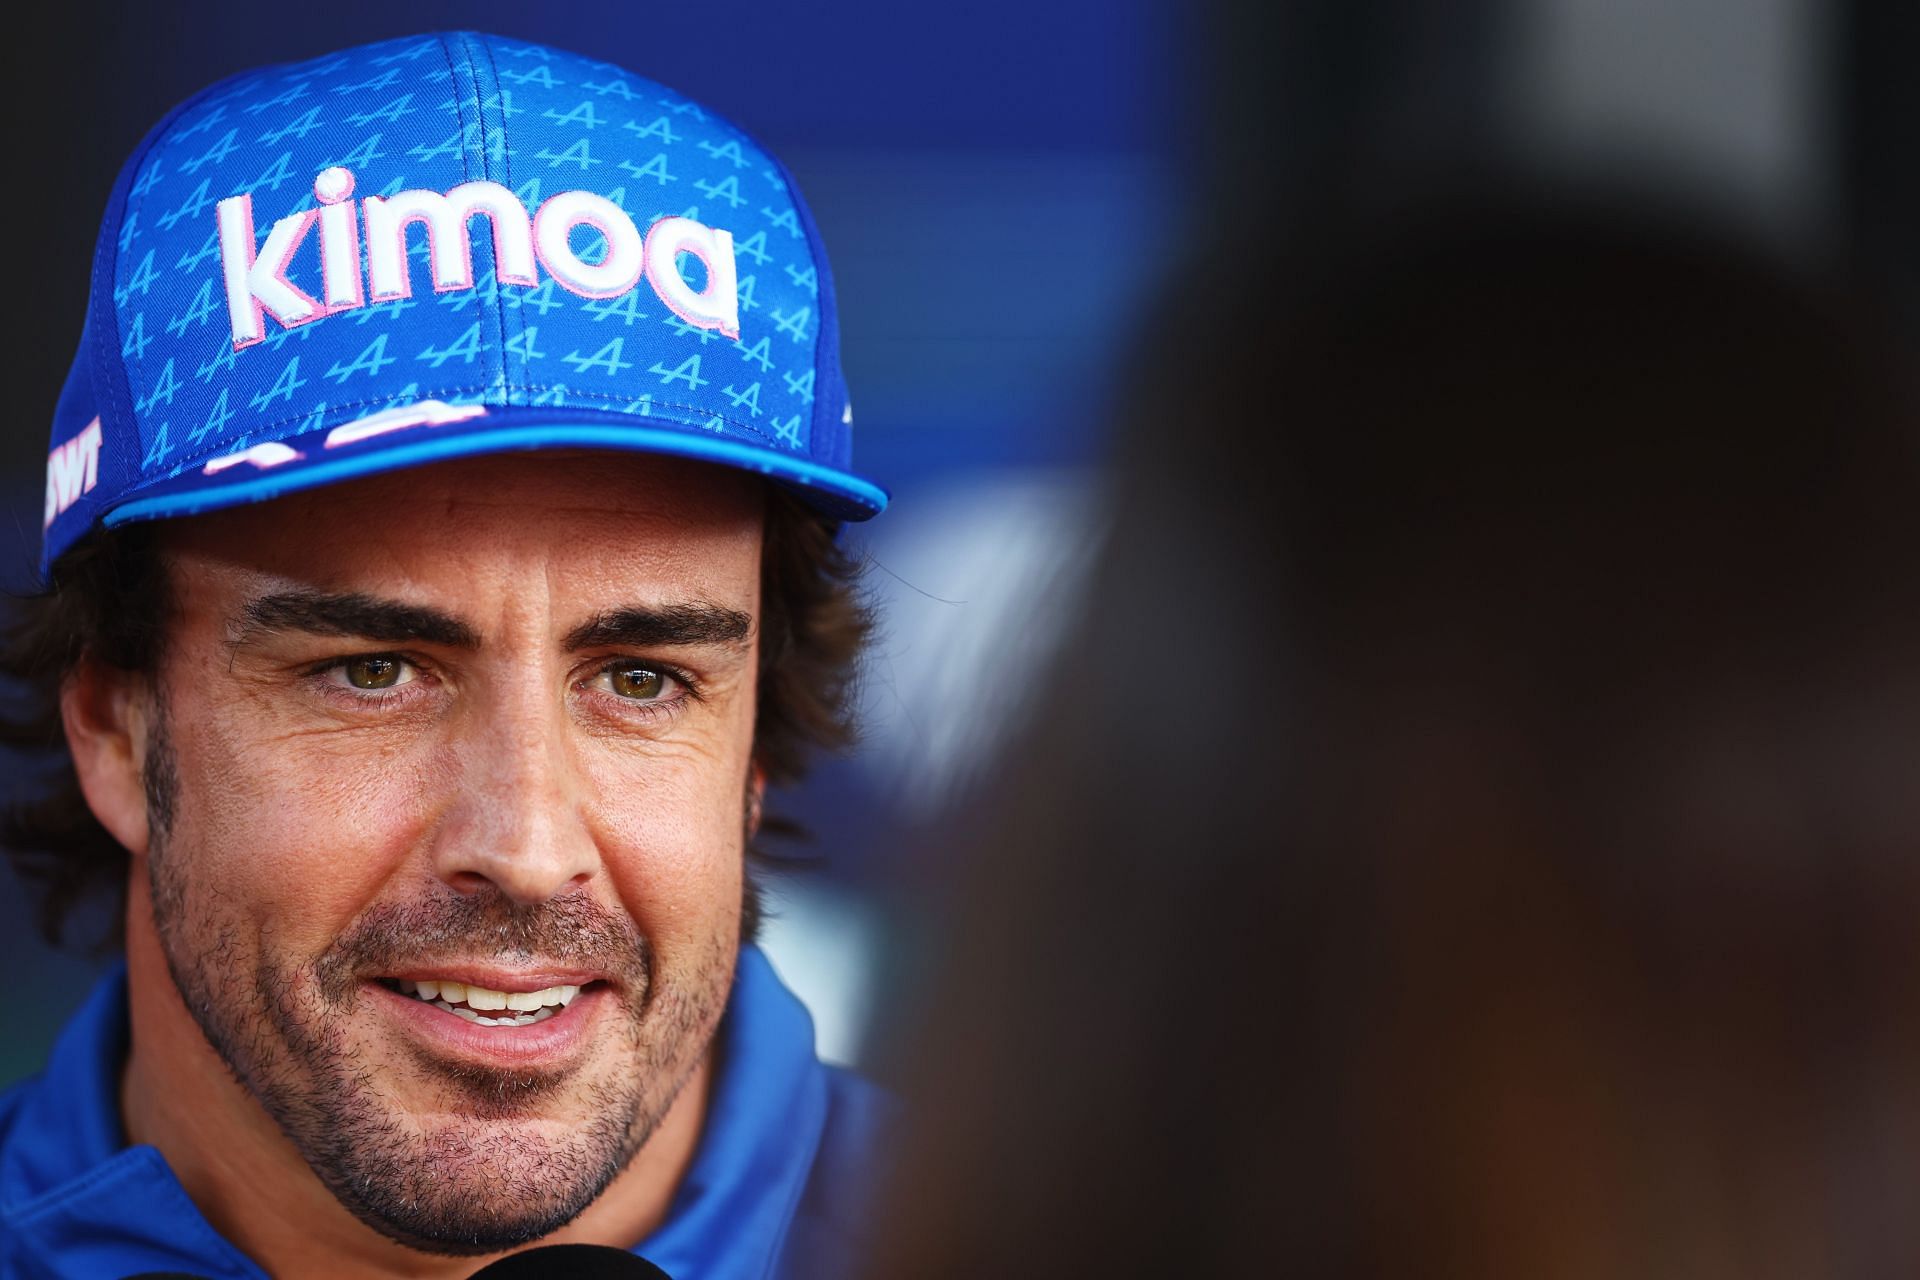 Fernando Alonso talks to the media in the Paddock during previews ahead of the F1 Grand Prix of Hungary at Hungaroring on July 28, 2022, in Budapest, Hungary (Photo by Francois Nel/Getty Images)